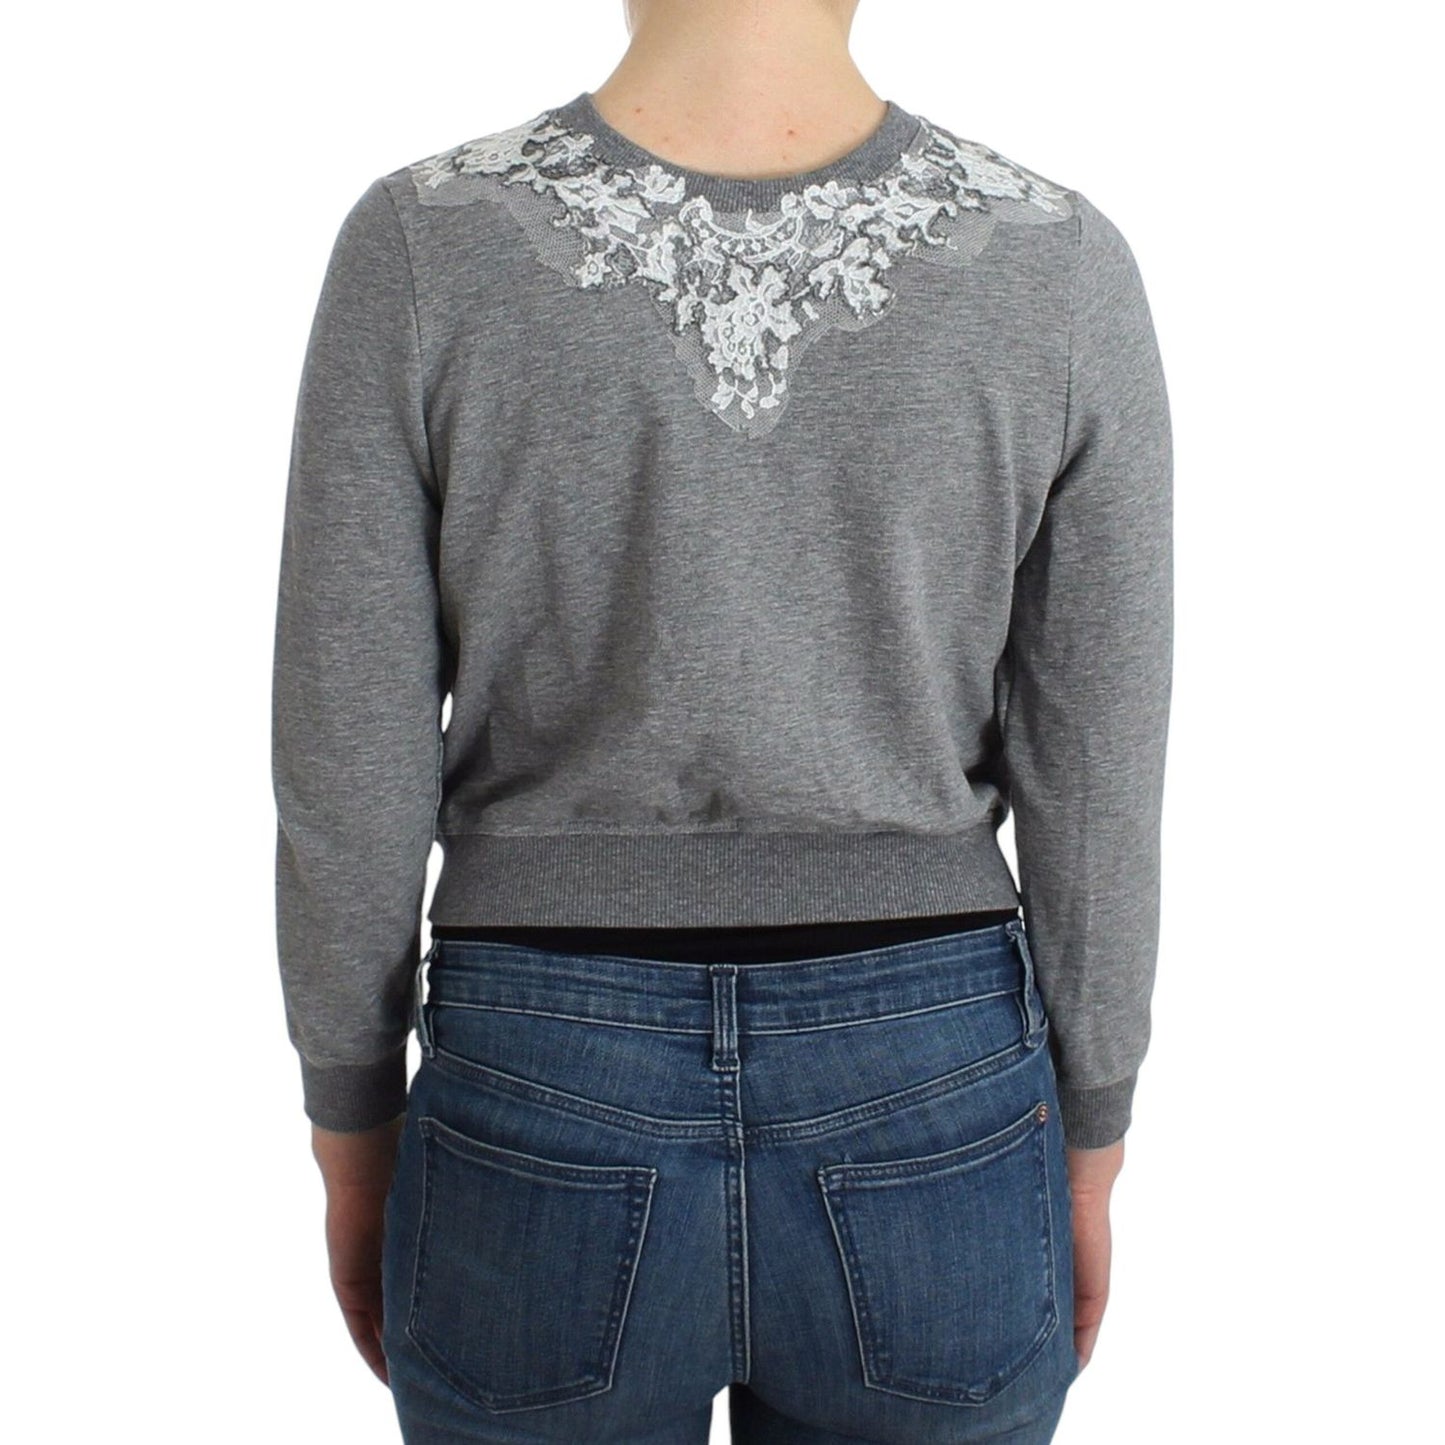 Ermanno Scervino Chic Gray Cotton Blend Short Cardigan lingerie-gray-lace-sweater-cardigan-top